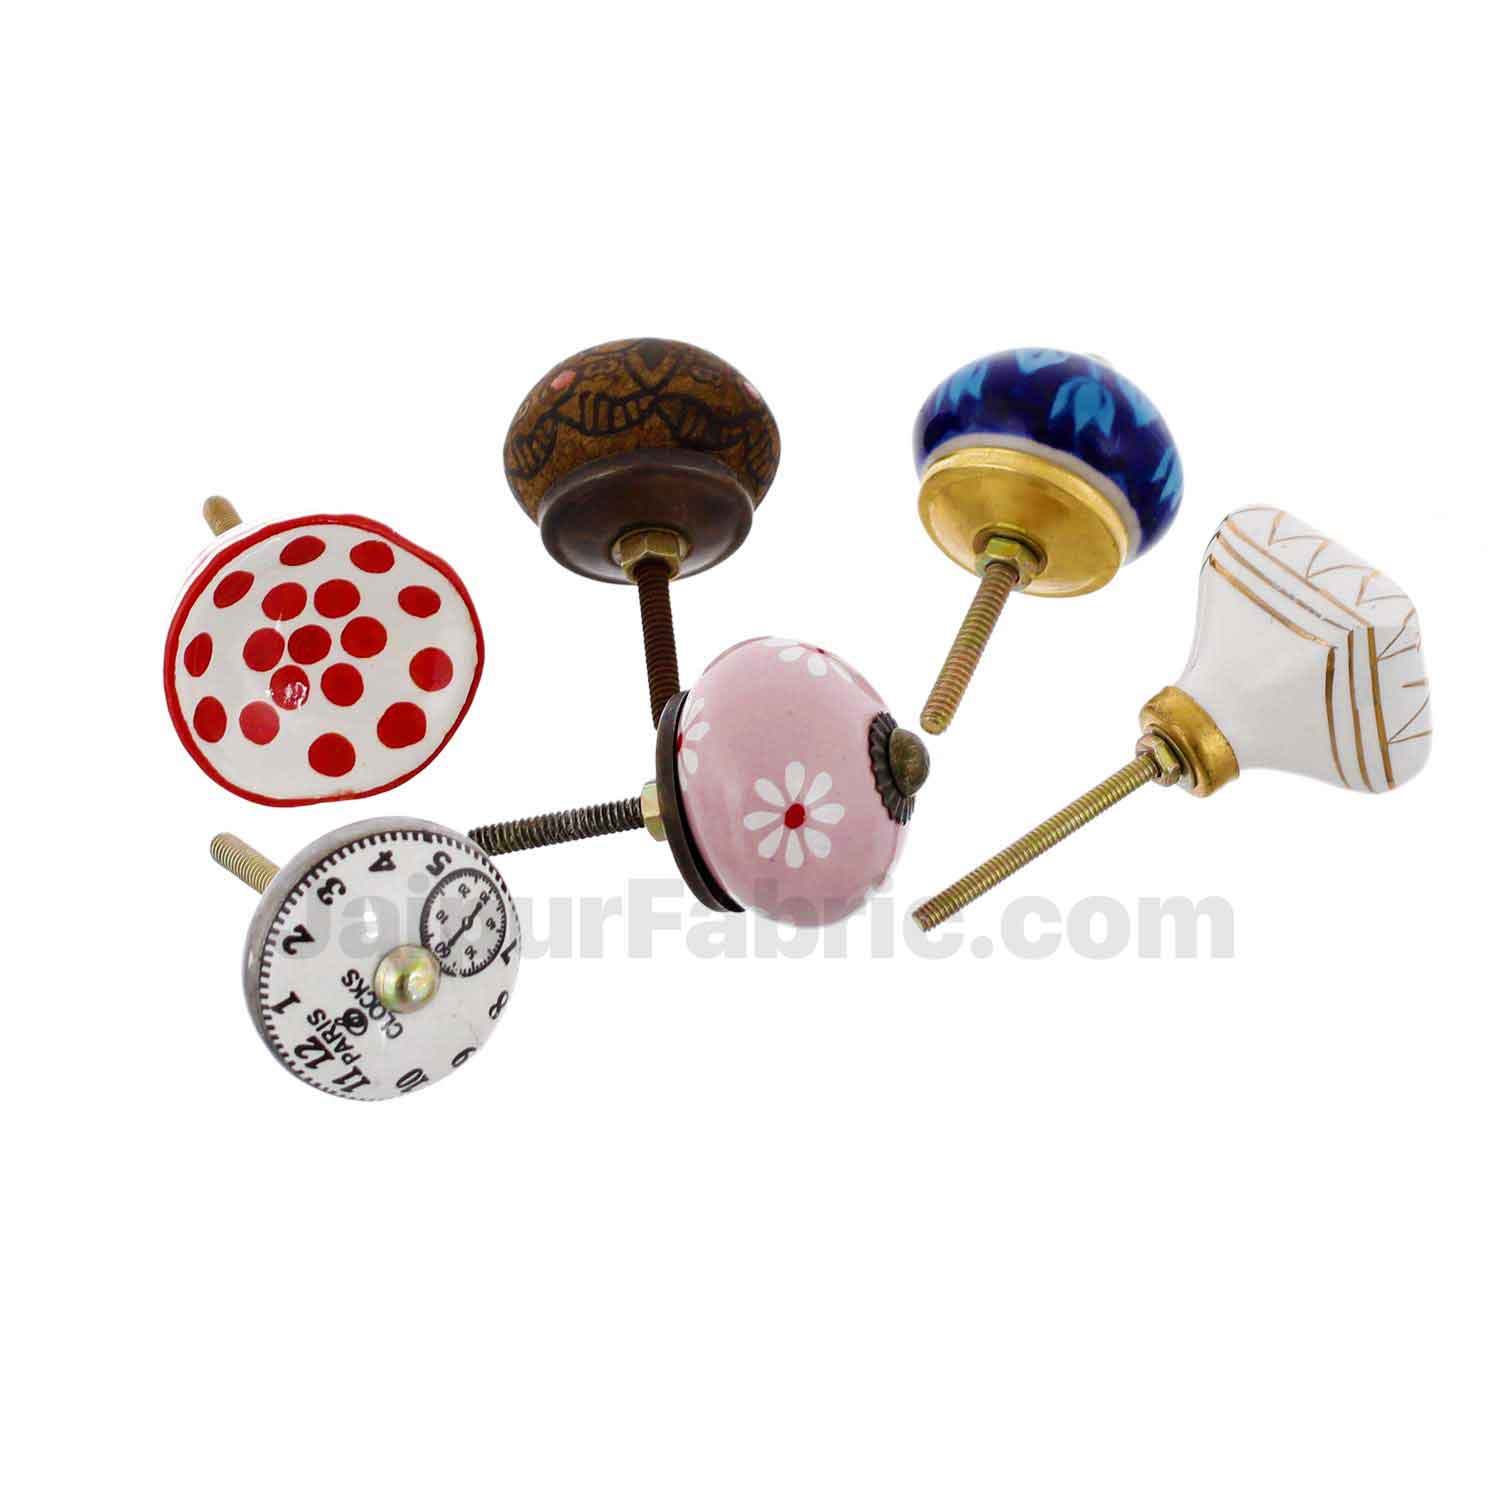 MultiColor Set of 6 Pcs Fabricated Knobs for Doors and Cabinets with Brass Blue Pottery